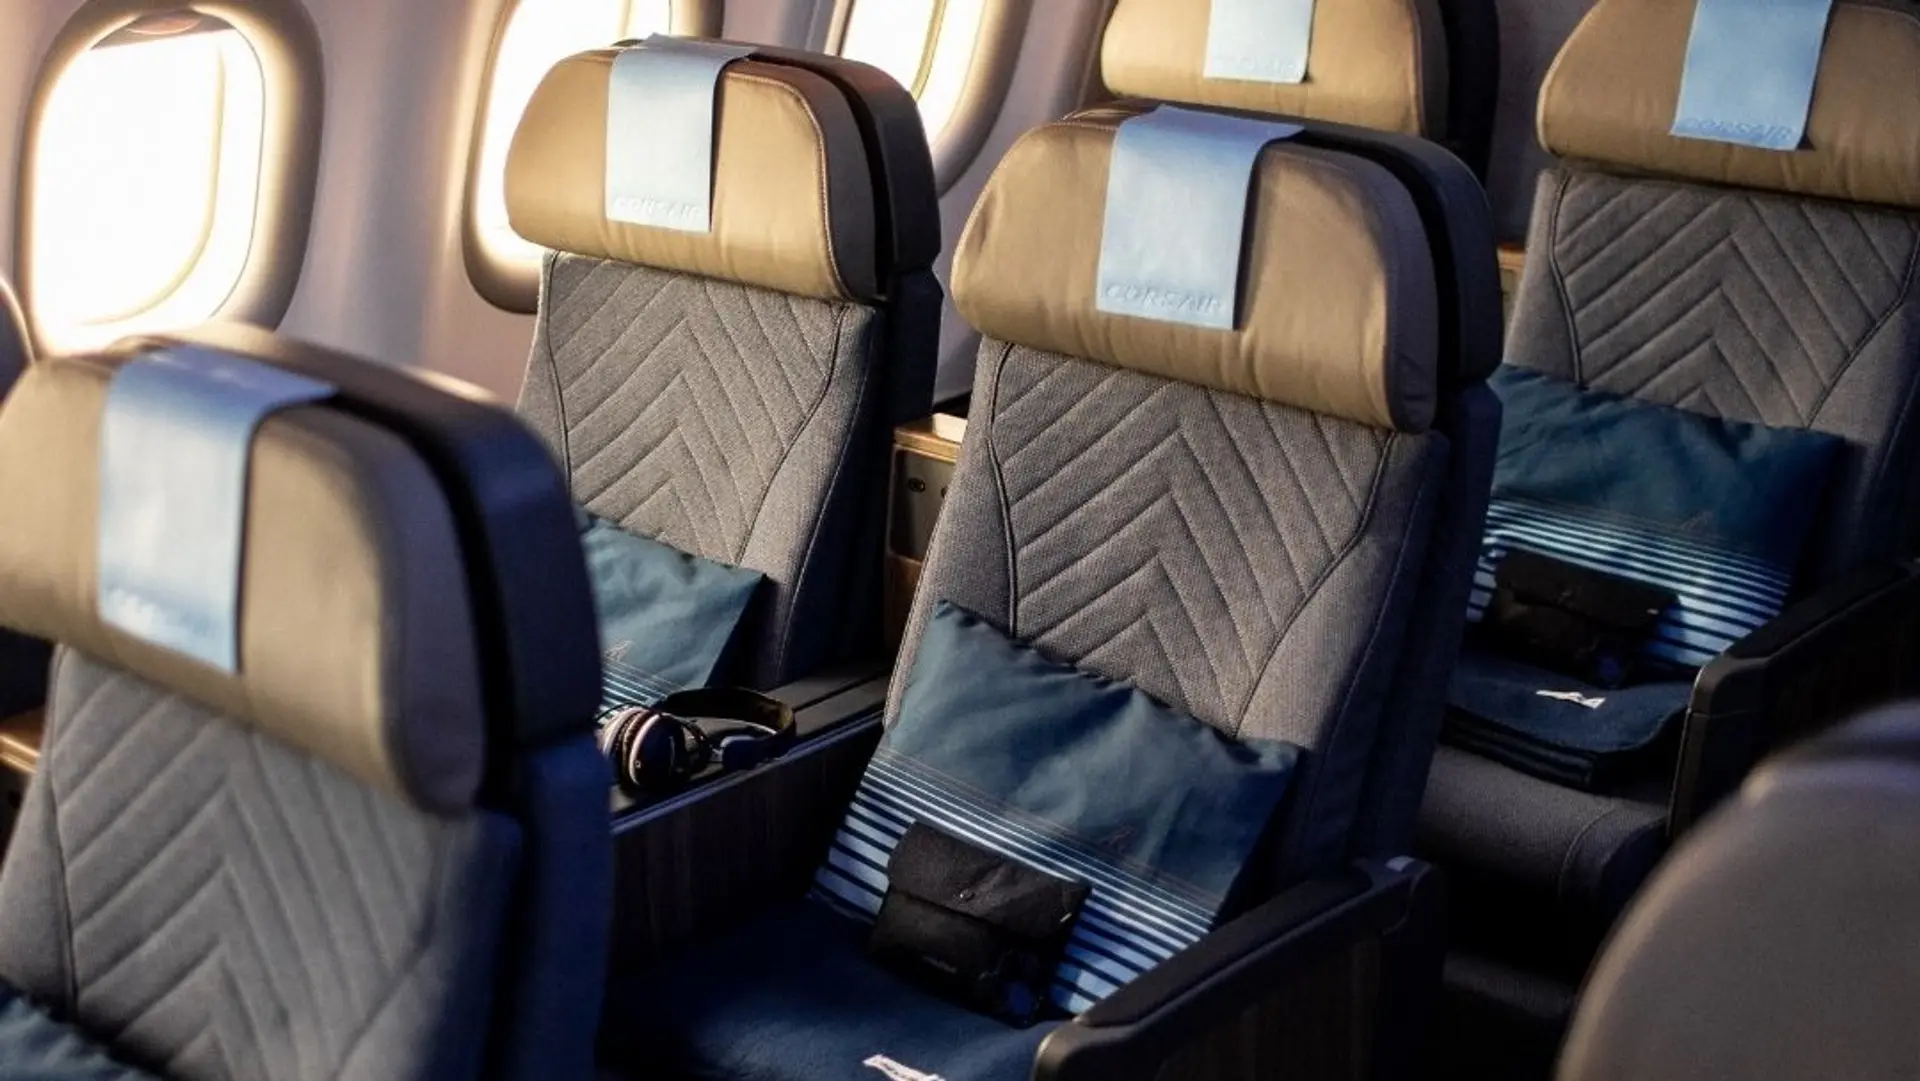 Airlines Articles - Corsair unveils its new Business Class seat